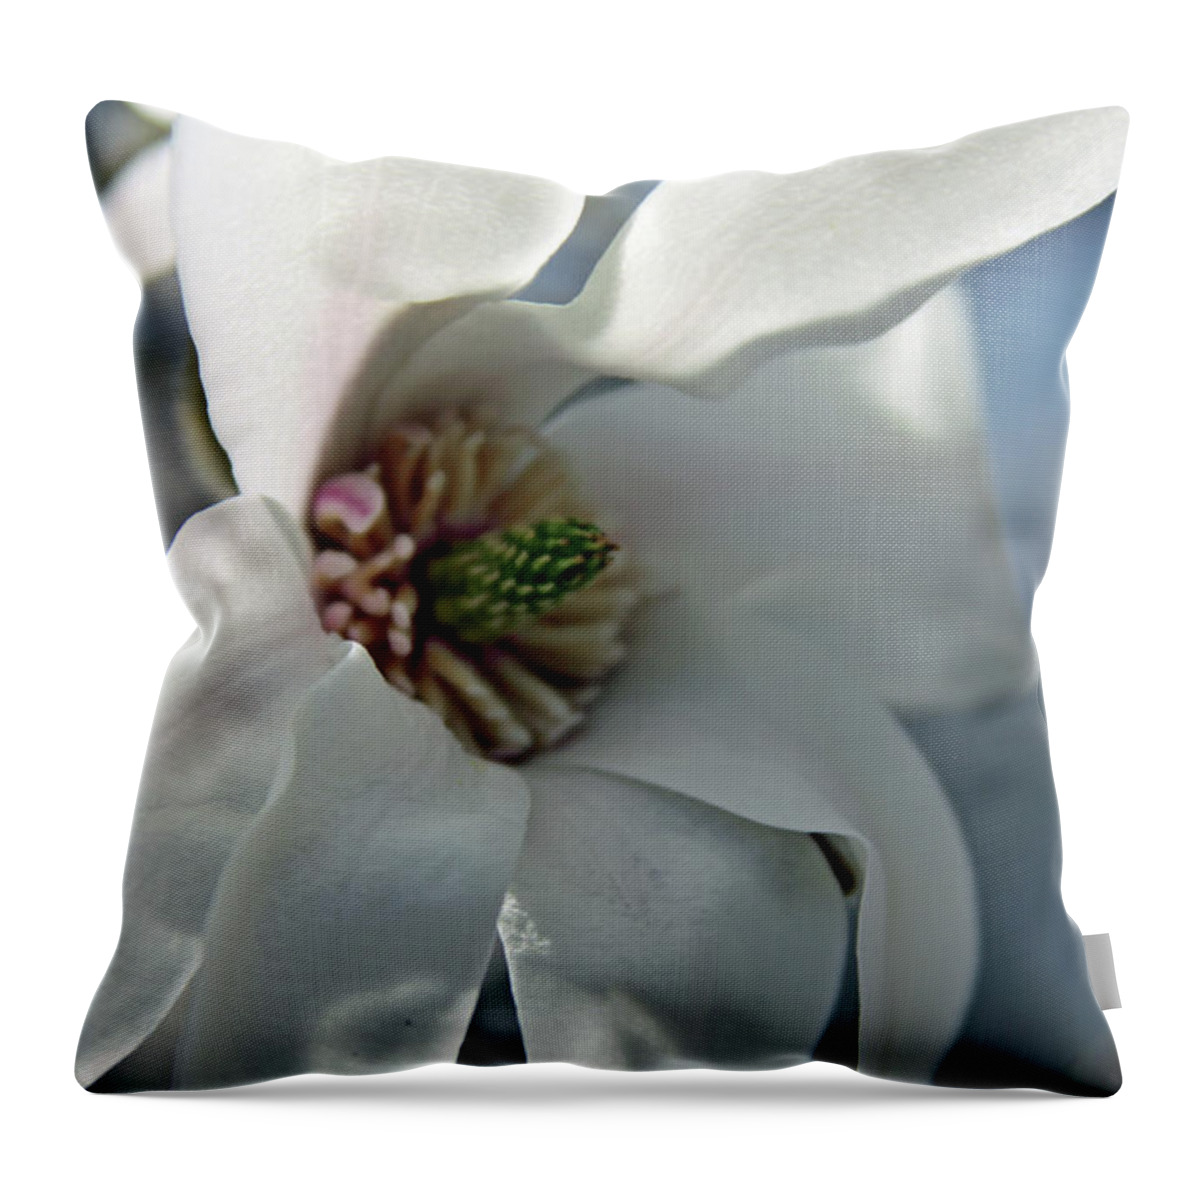 Magnolia Throw Pillow featuring the photograph Magnolia5471 by Carolyn Stagger Cokley